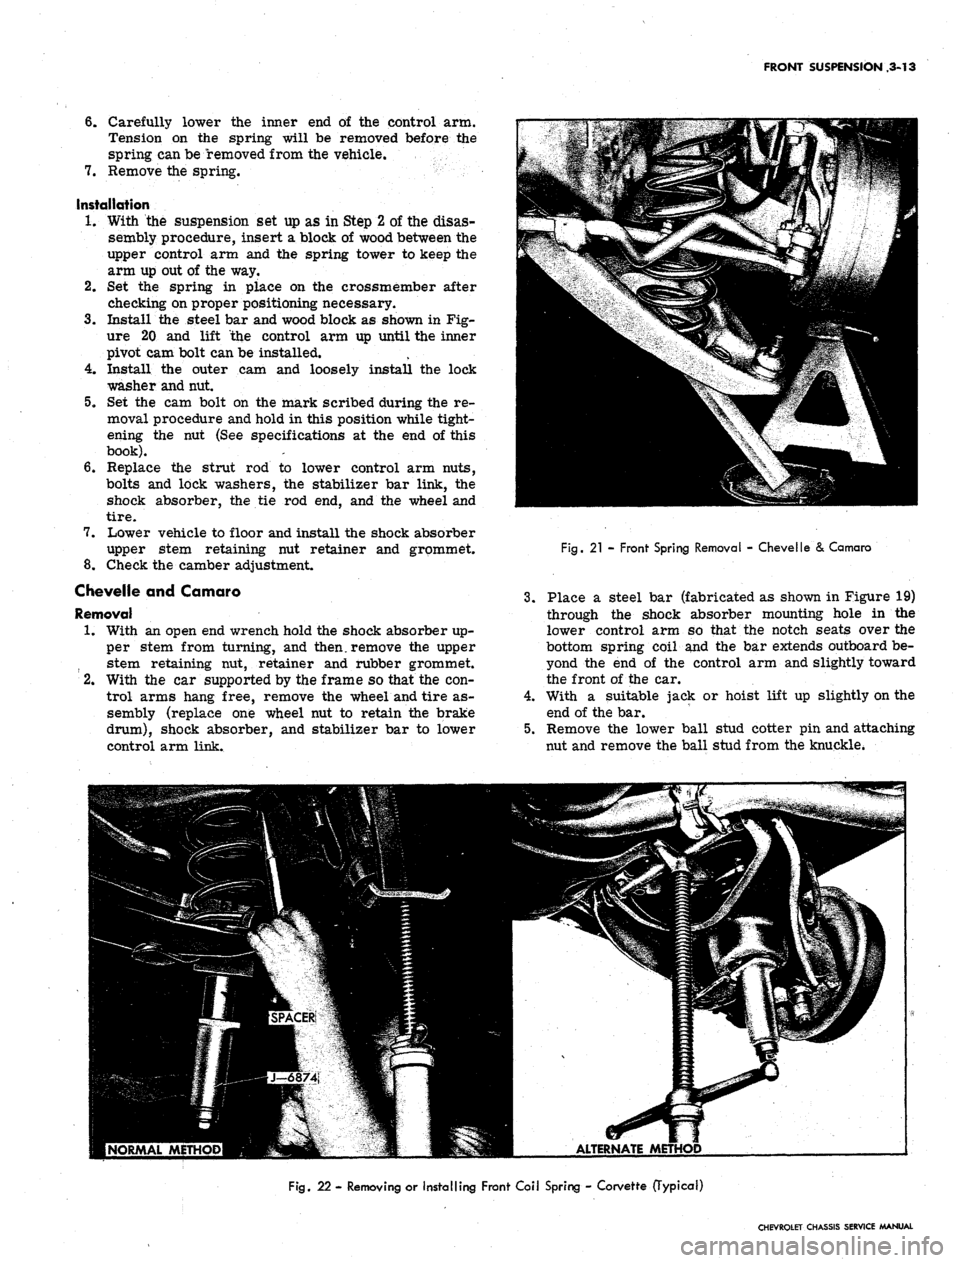 CHEVROLET CAMARO 1967 1.G Chassis Owners Manual 
FRONT SUSPENSION ,3-13

6. Carefully lower the inner end of the control arm.

Tension on the spring will be removed before the

spring can be removed from the vehicle.

7.
 Remove the spring.

Instal